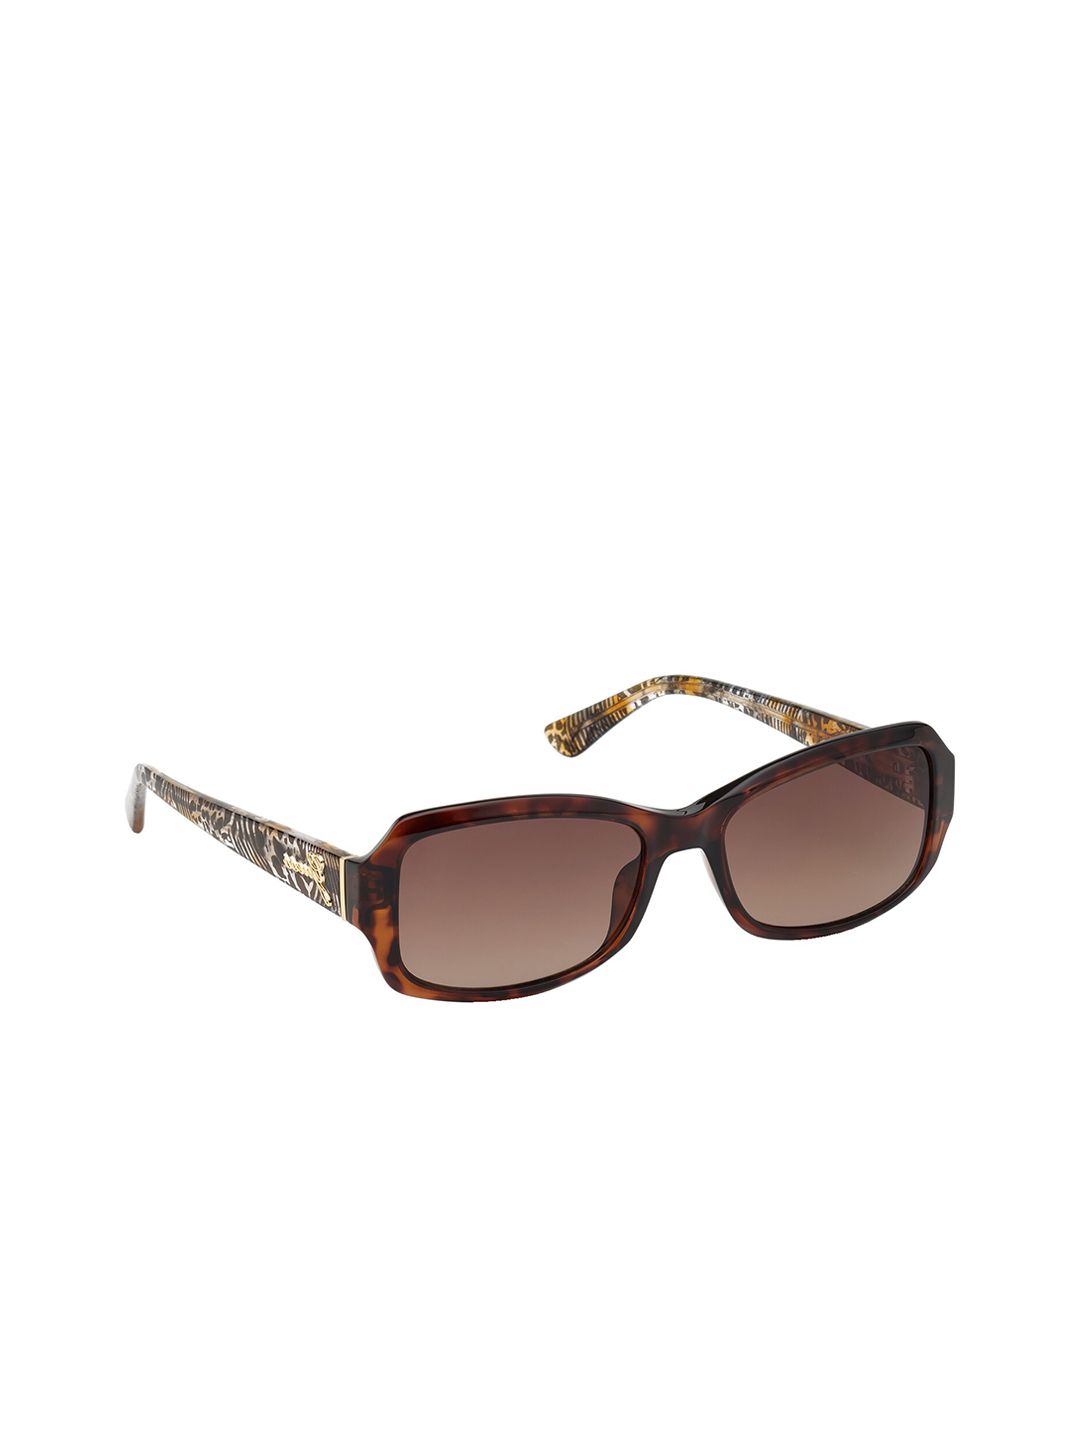 Guess Women Brown Lens & Rectangle Sunglasses GU7683 55 52F Price in India